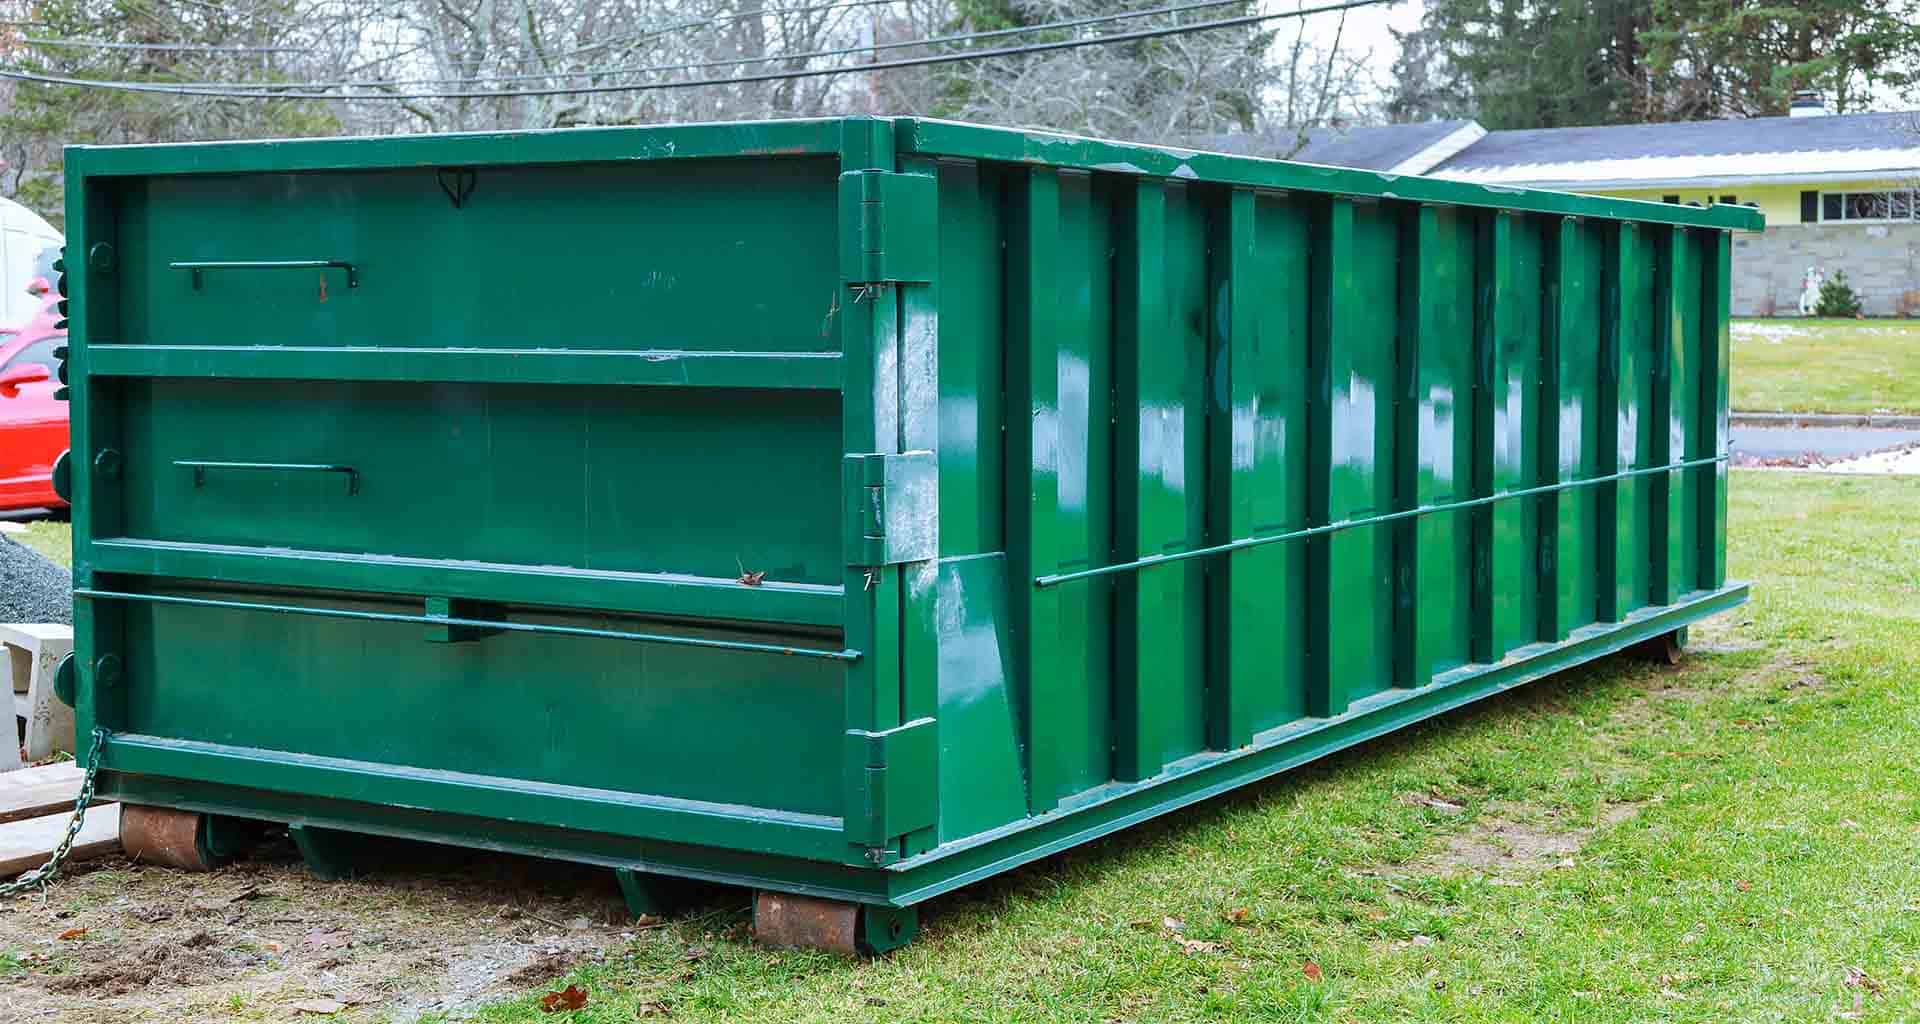 Dumpster Rentals in Cranberry PA